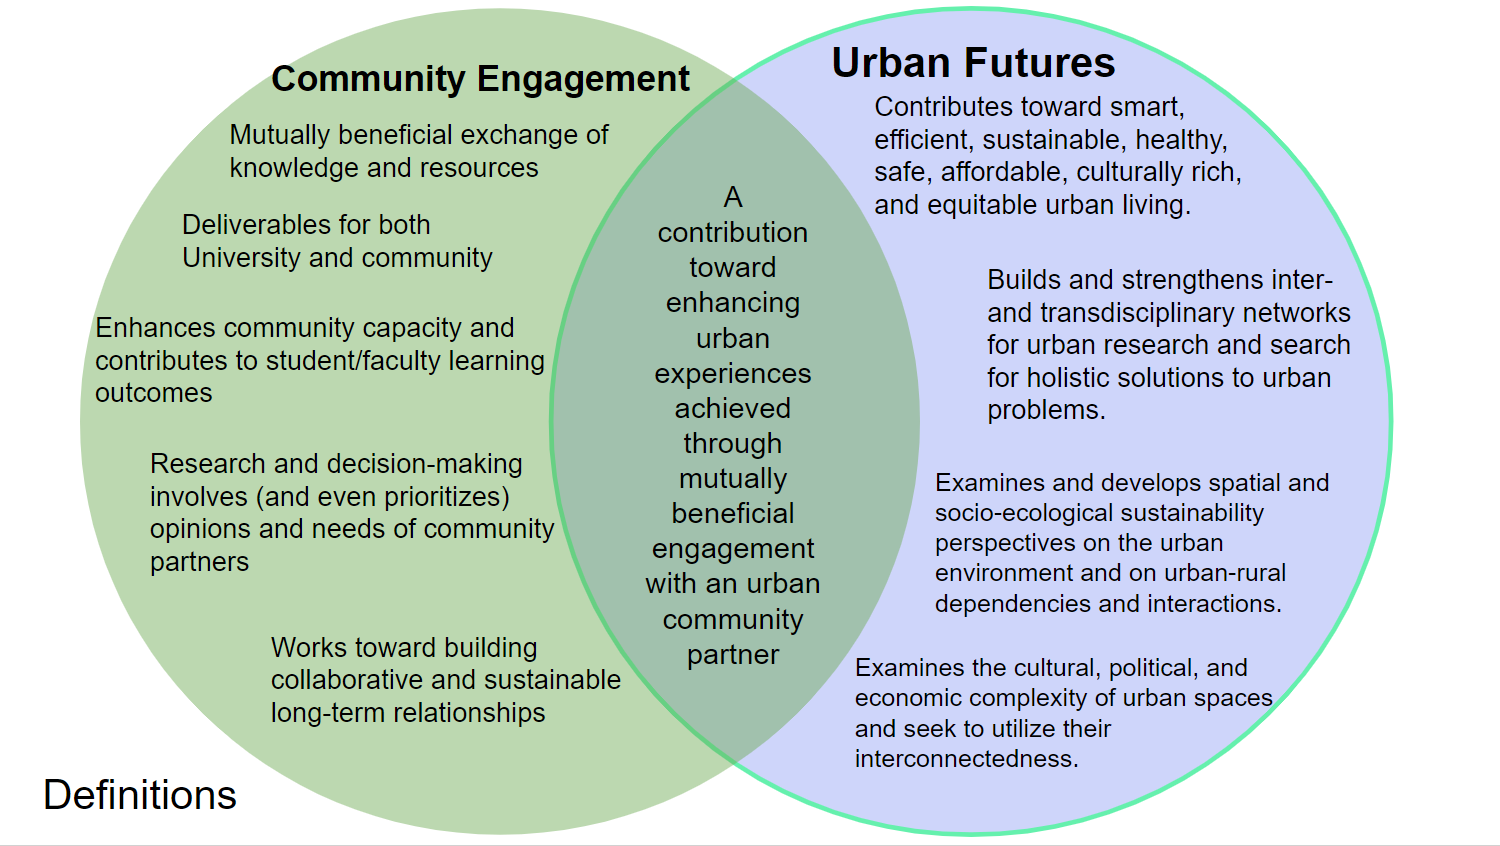 a venn diagram explaining the similarities and differences between urban futures and community engagement